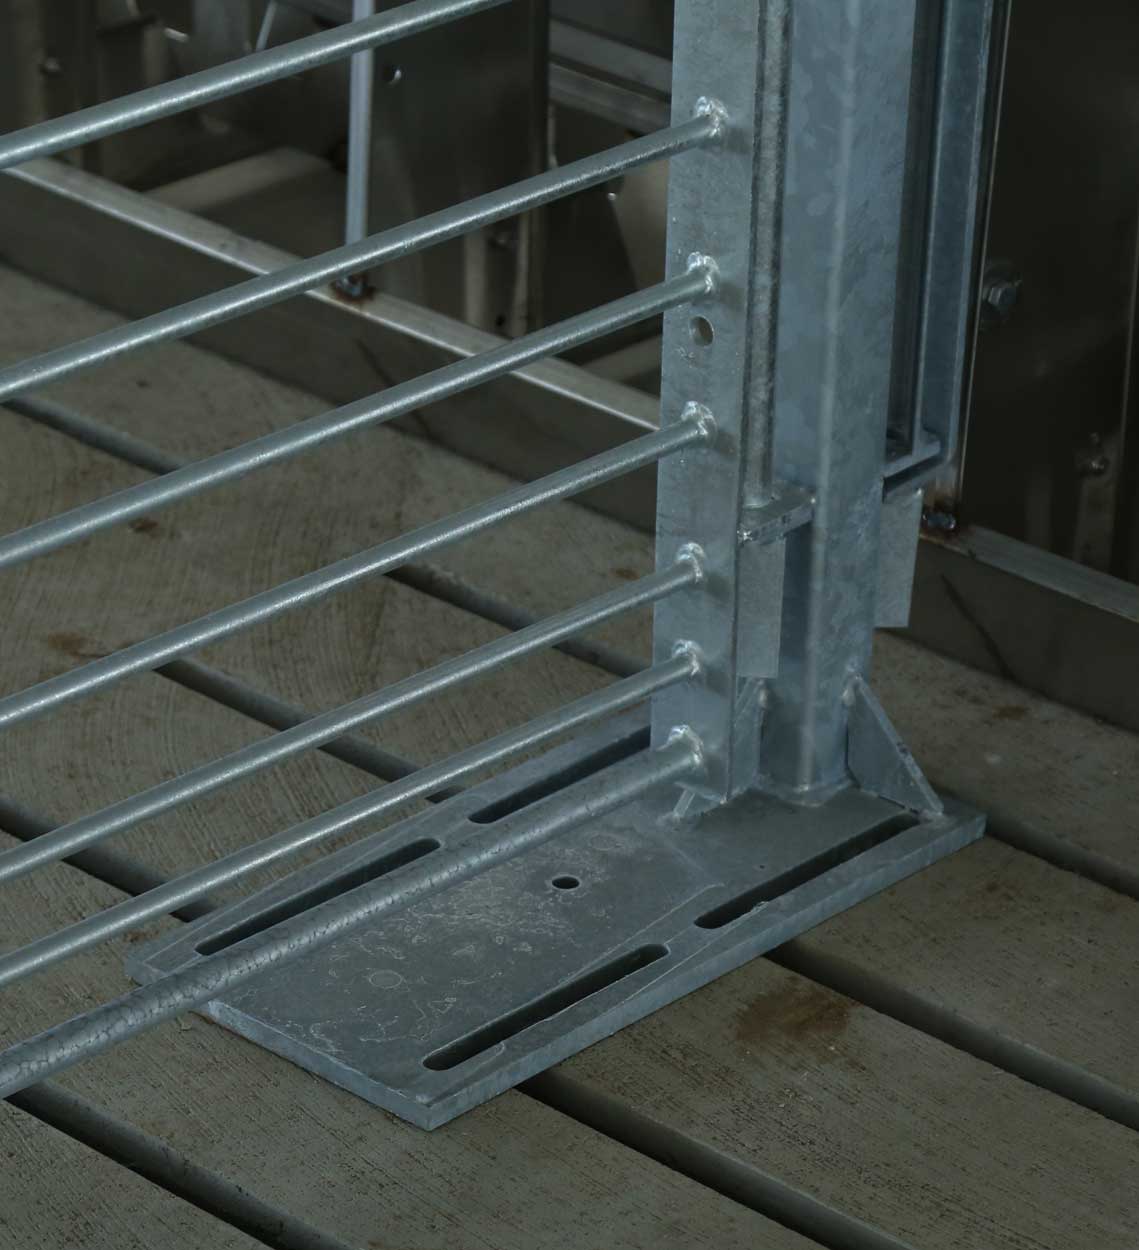 Quality designs, reliable welds and durable finishes combine to make Hog Slat penning, post and installation equipment the smart choice for all your confinement gating needs.